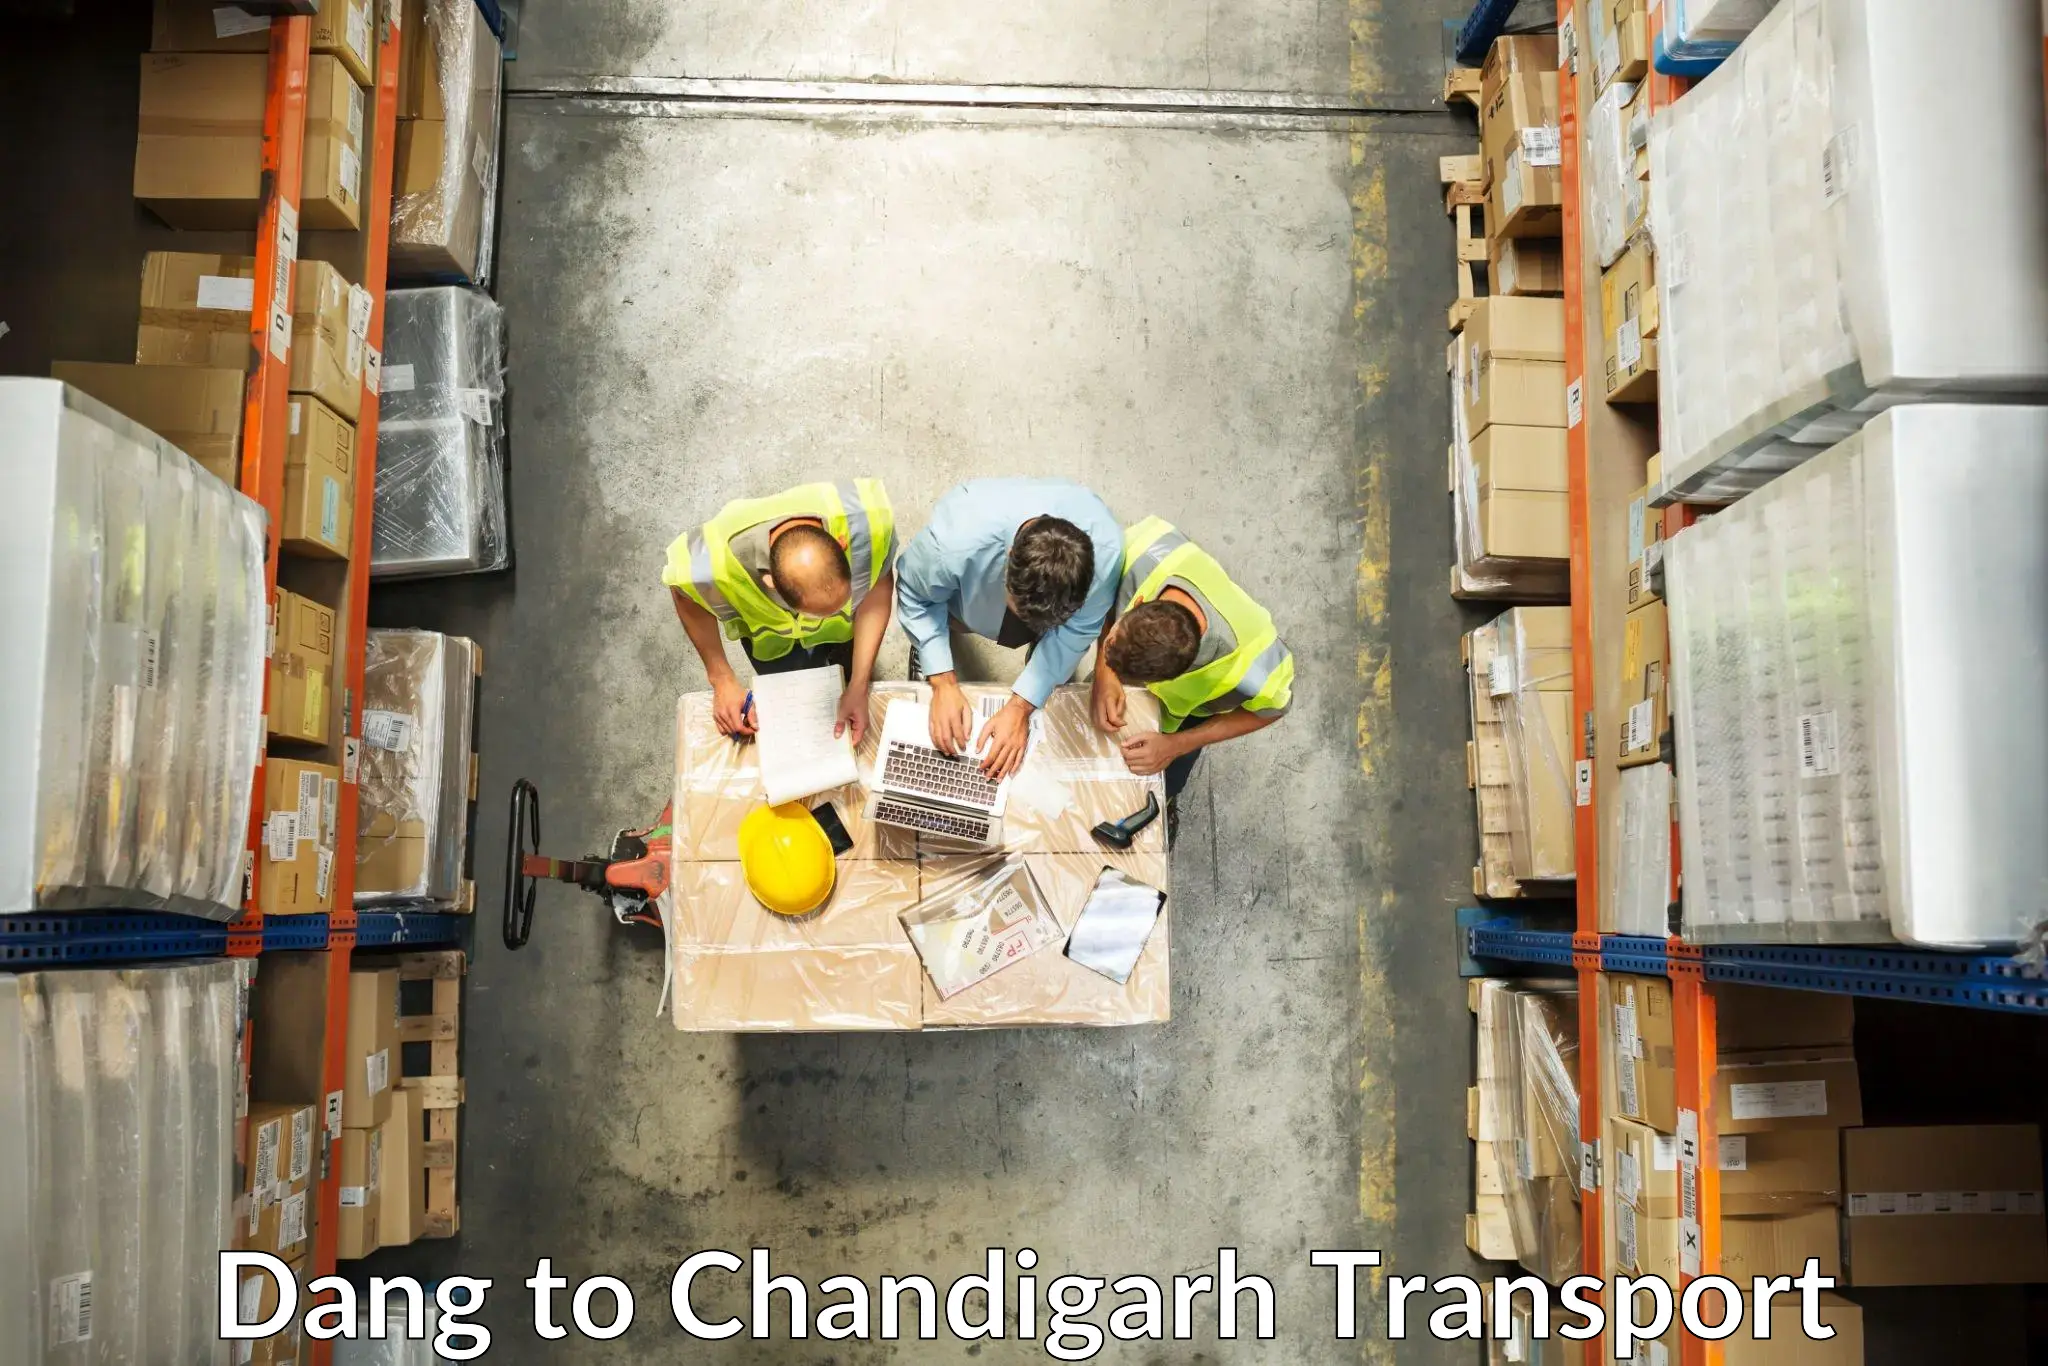 Commercial transport service Dang to Chandigarh